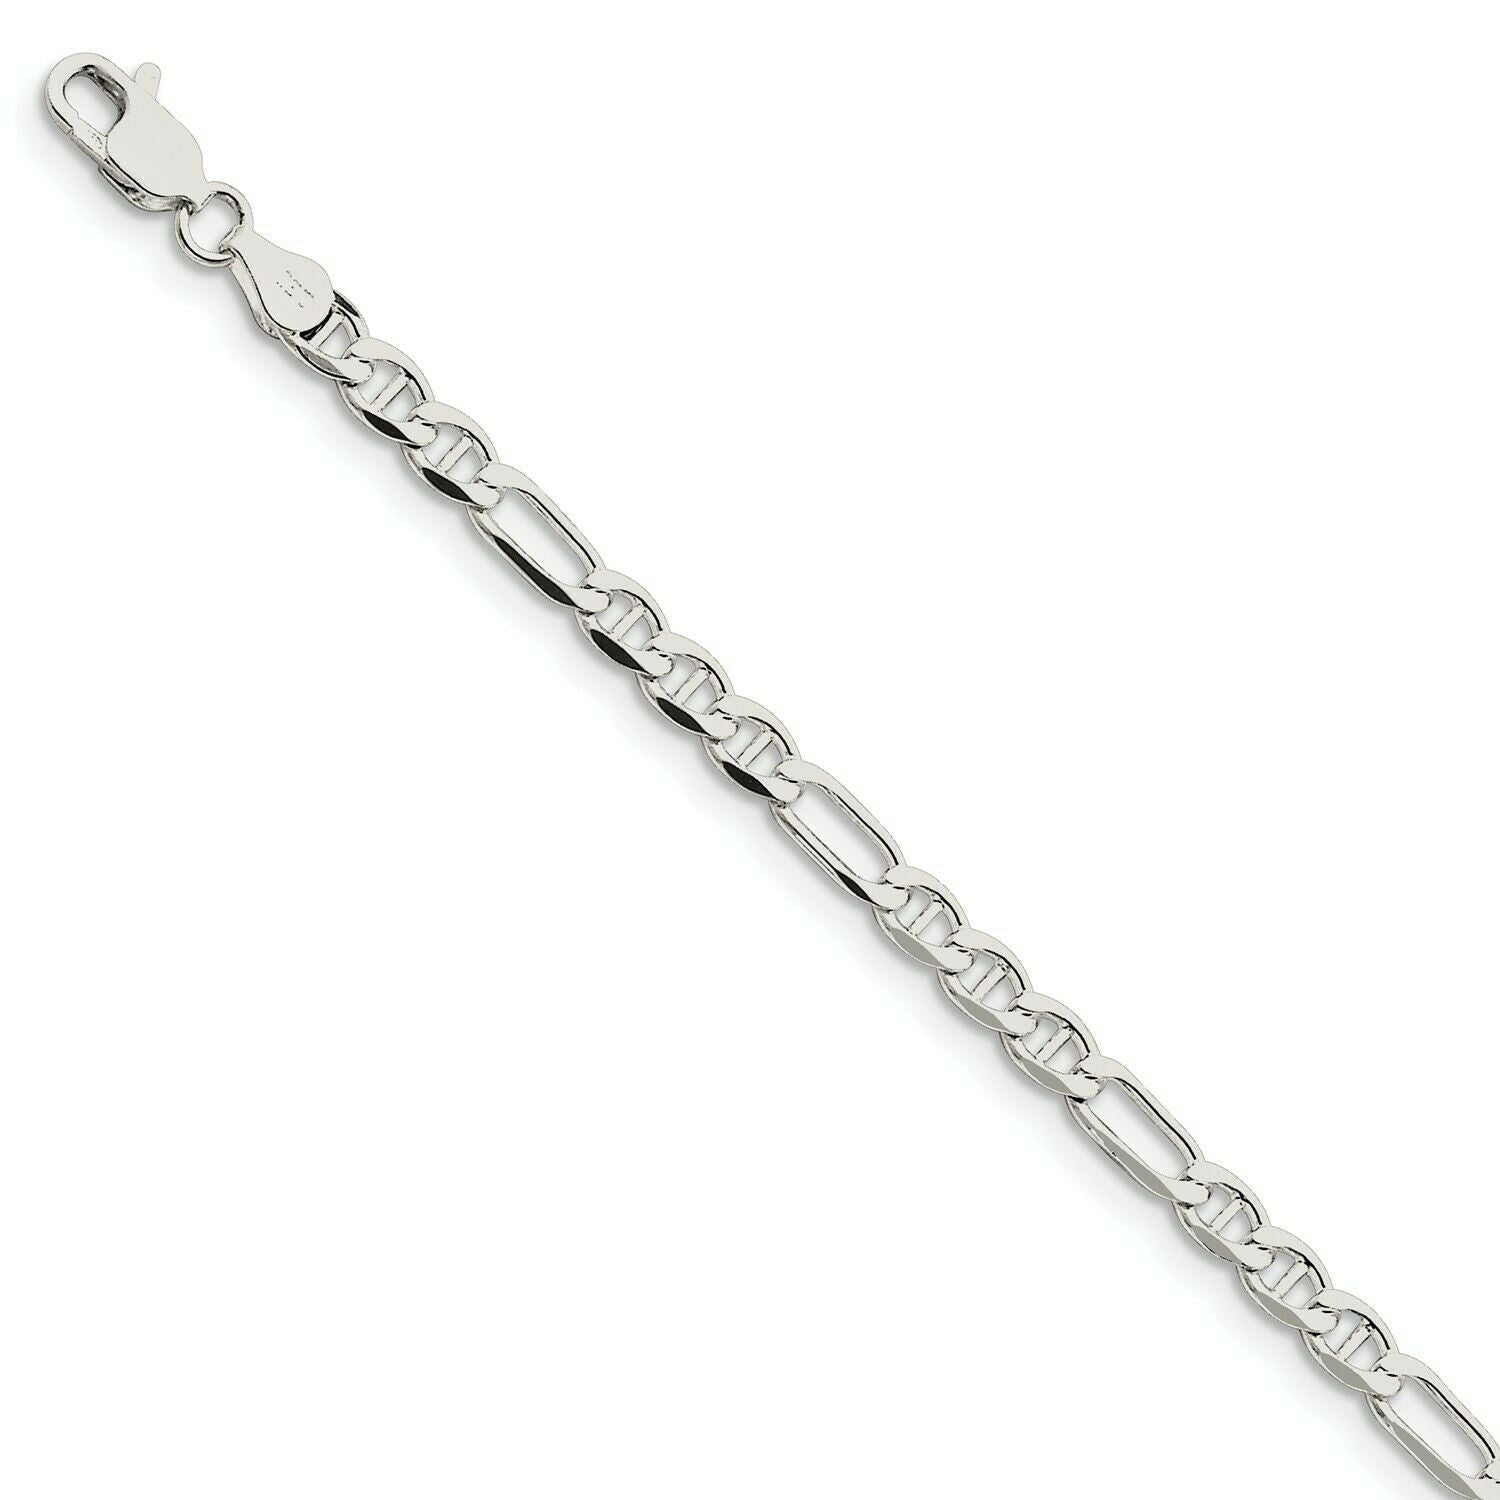 Figarucci Figaro Mariner Anchor Link 24" Chain Necklace in Solid .925 Sterling Silver